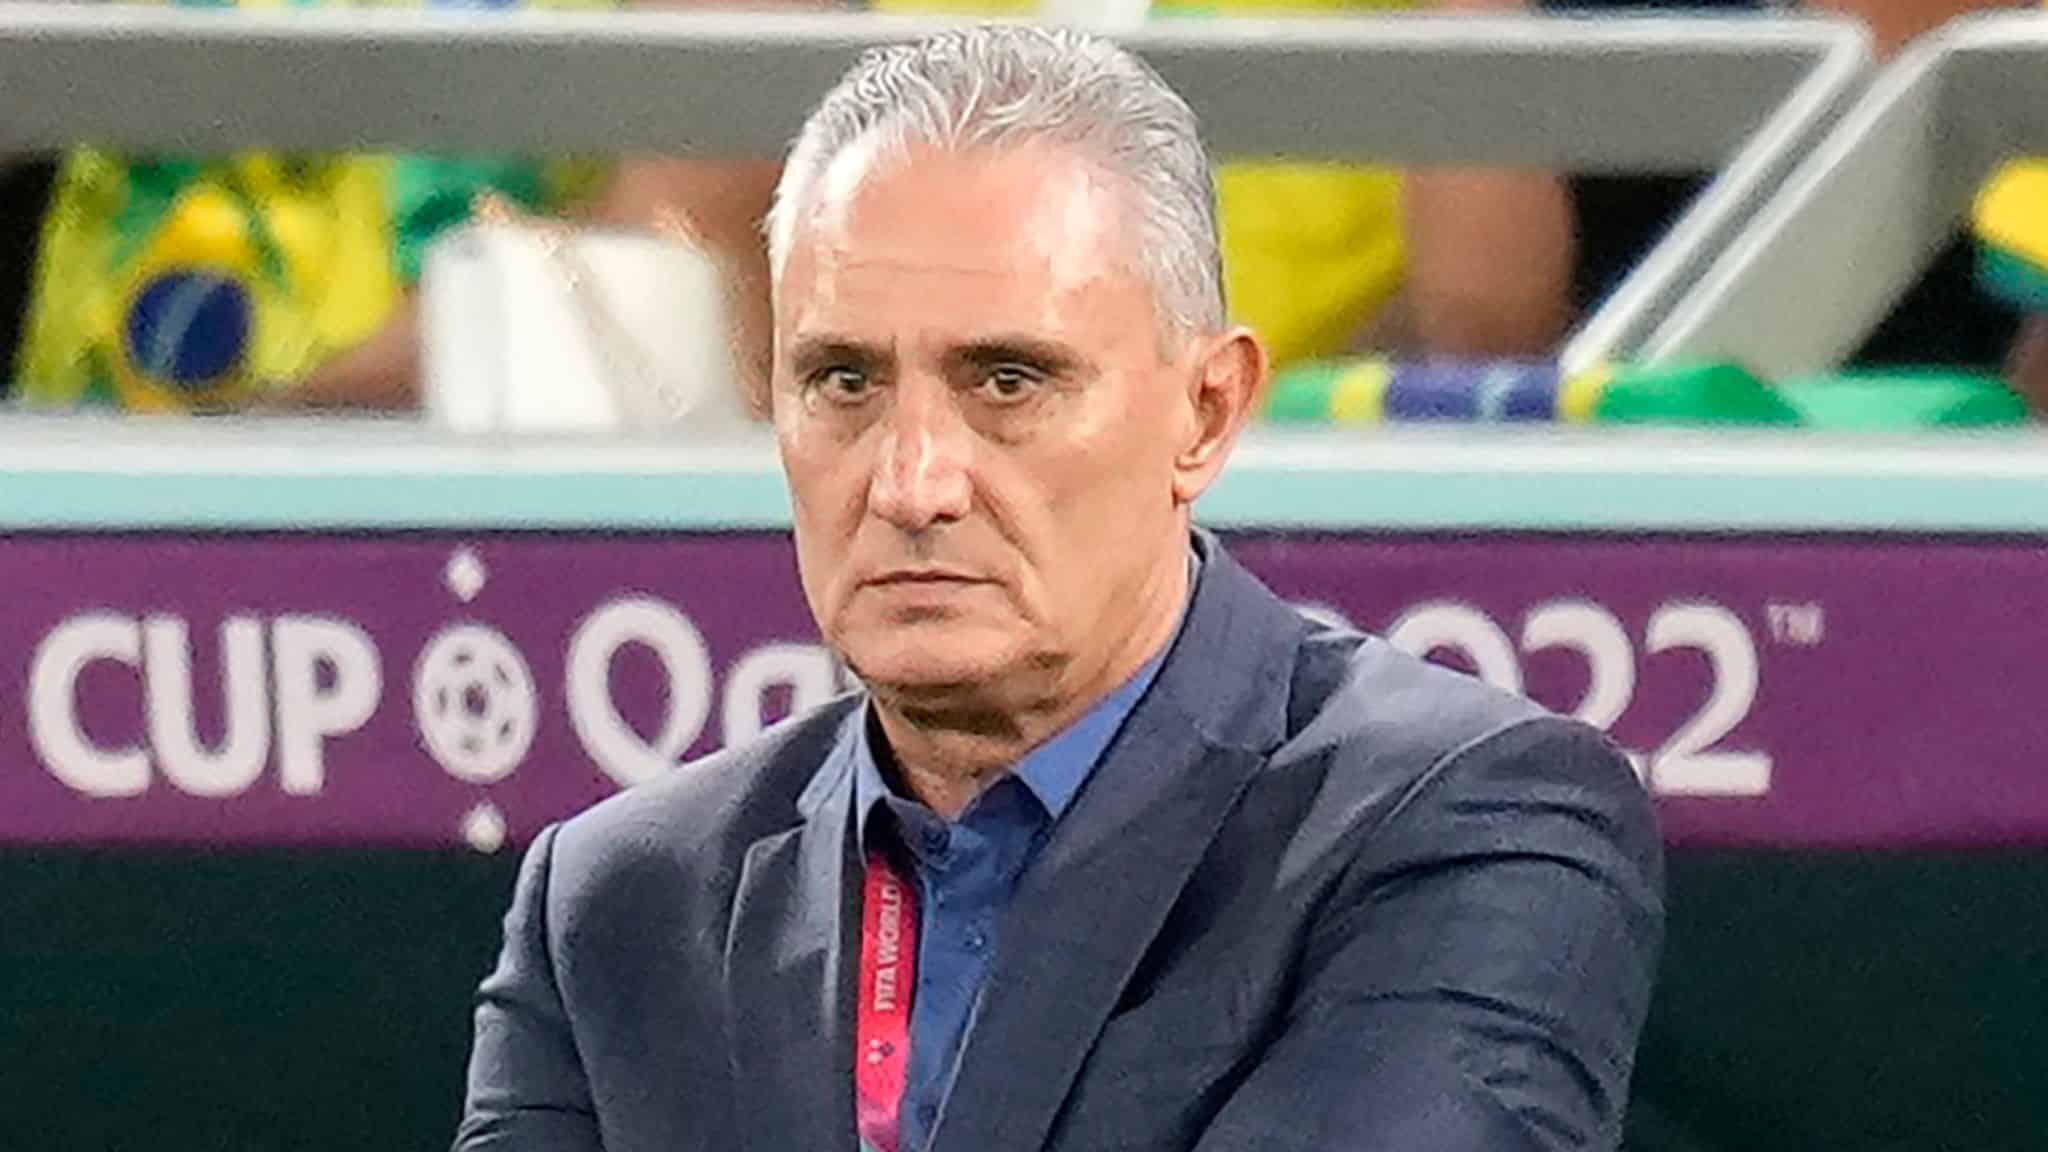 2022 World Cup: Tite leaves role as Brazil coach after Croatia defeat